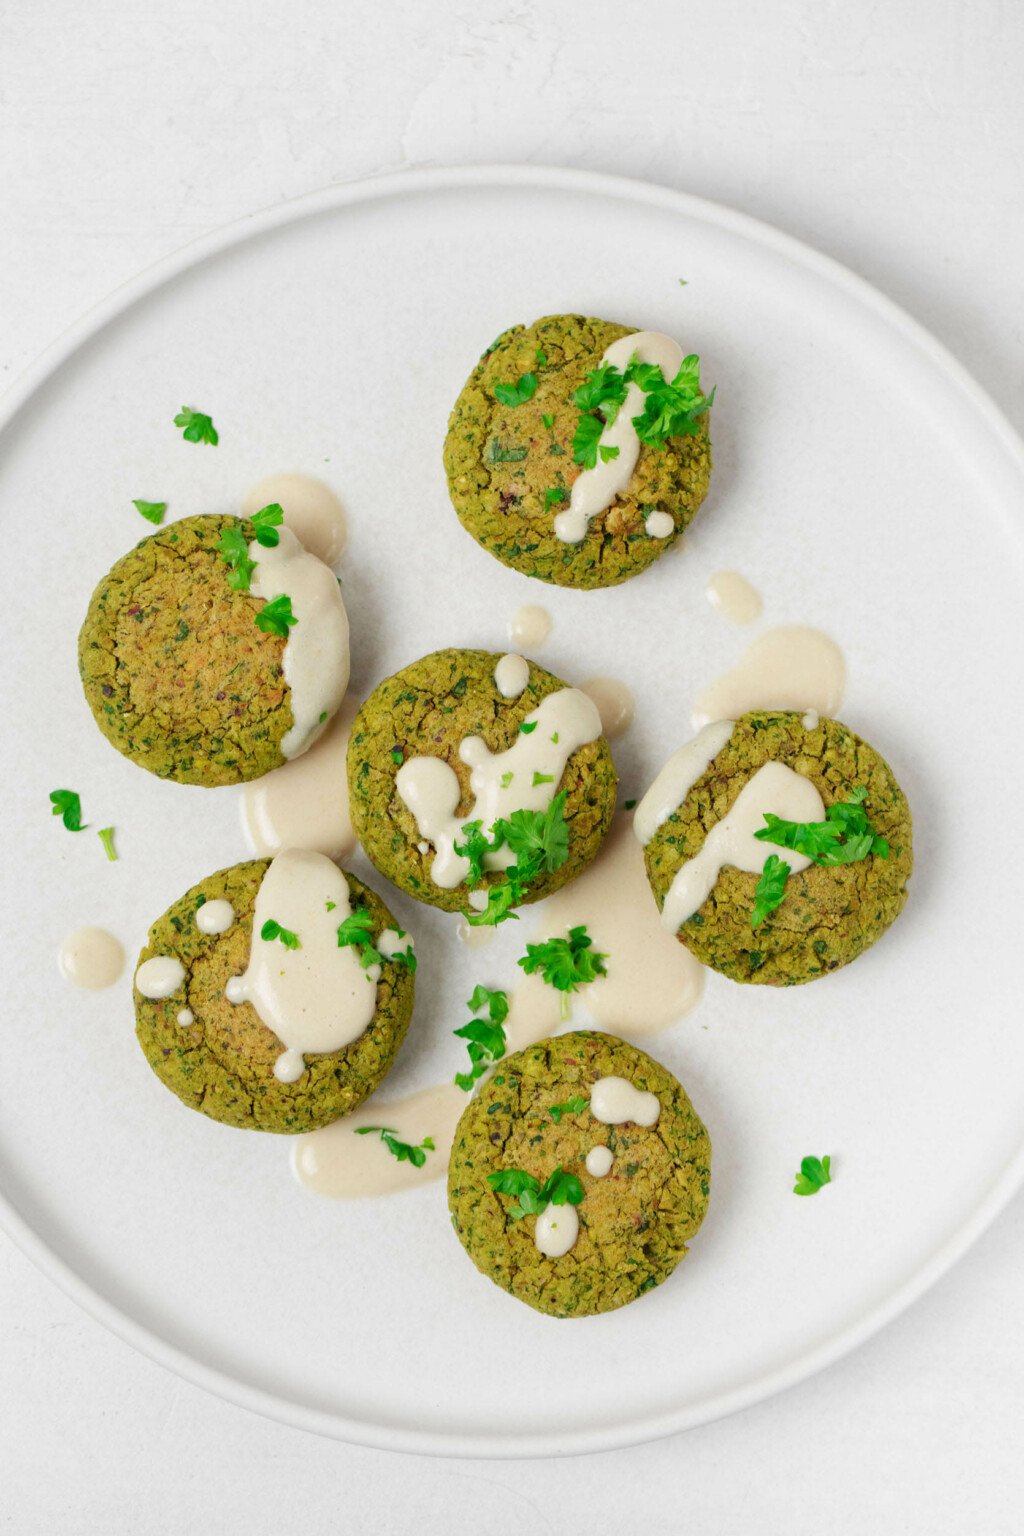 Vegan pistachio spinach falafel have been arranged on a white plate. They're drizzled with tahini sauce and sprinkled with fresh herbs.